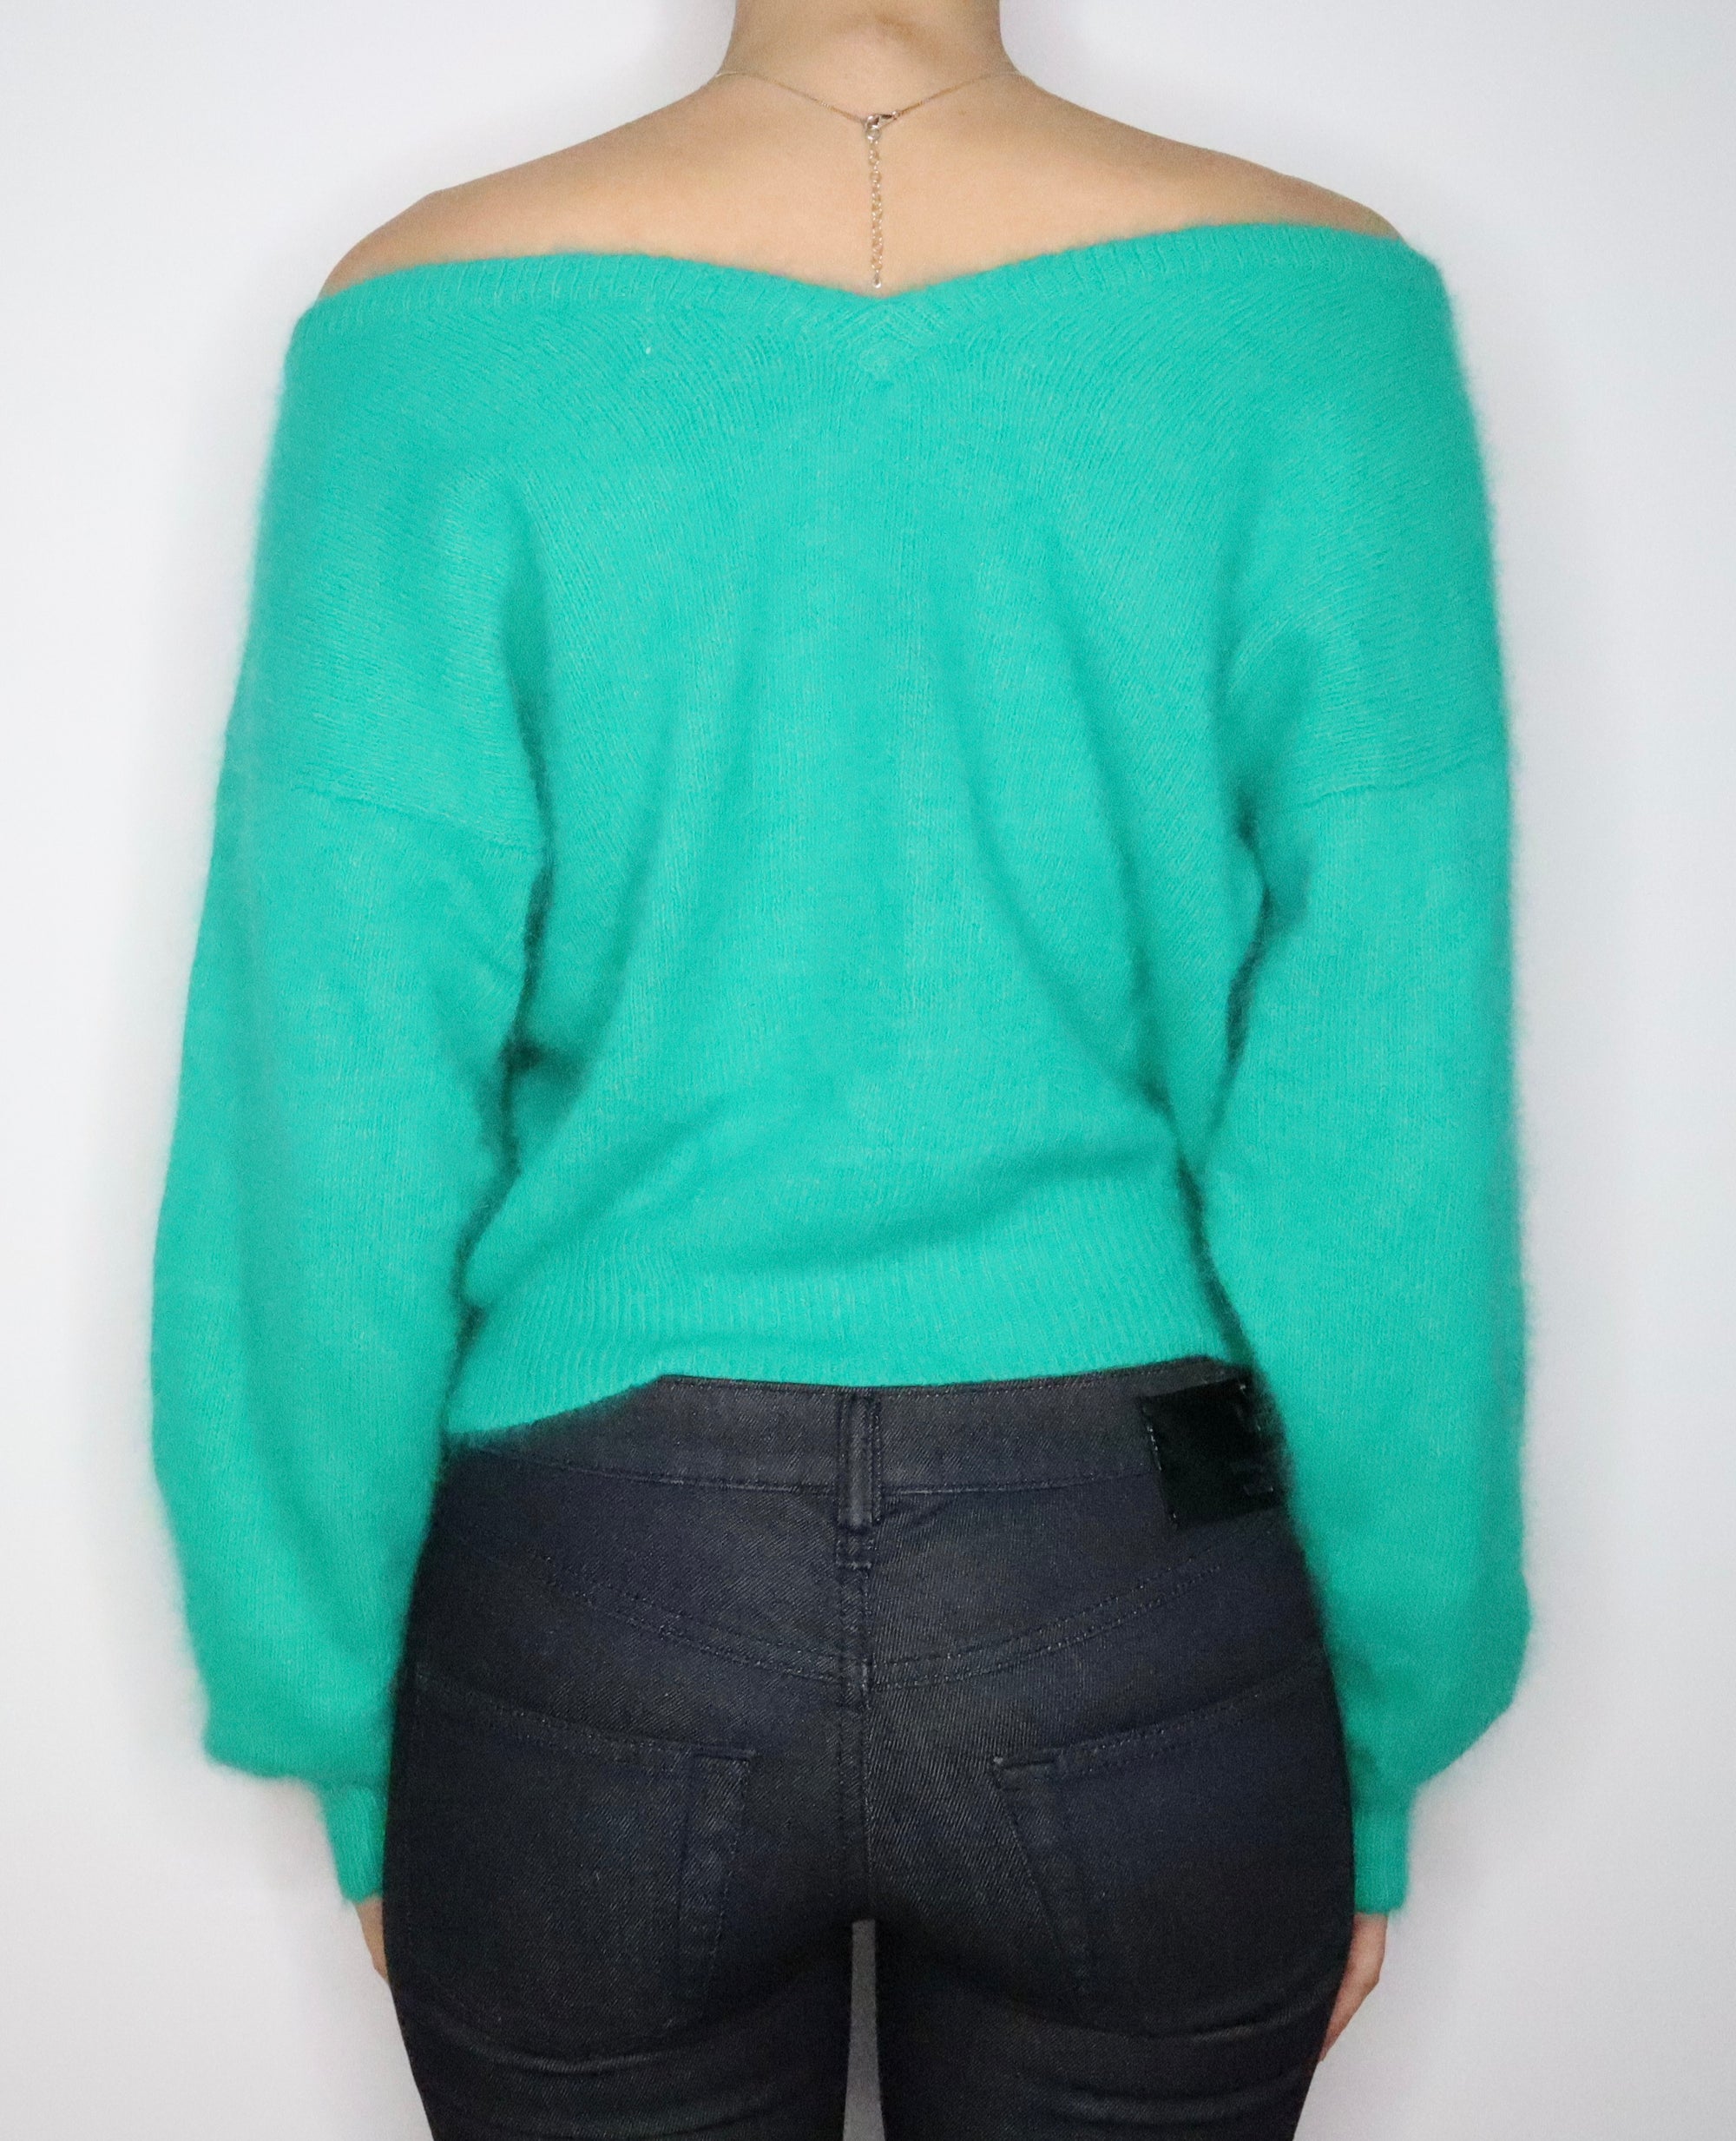 Kelly Green Slouchy Sweater (M-L) 